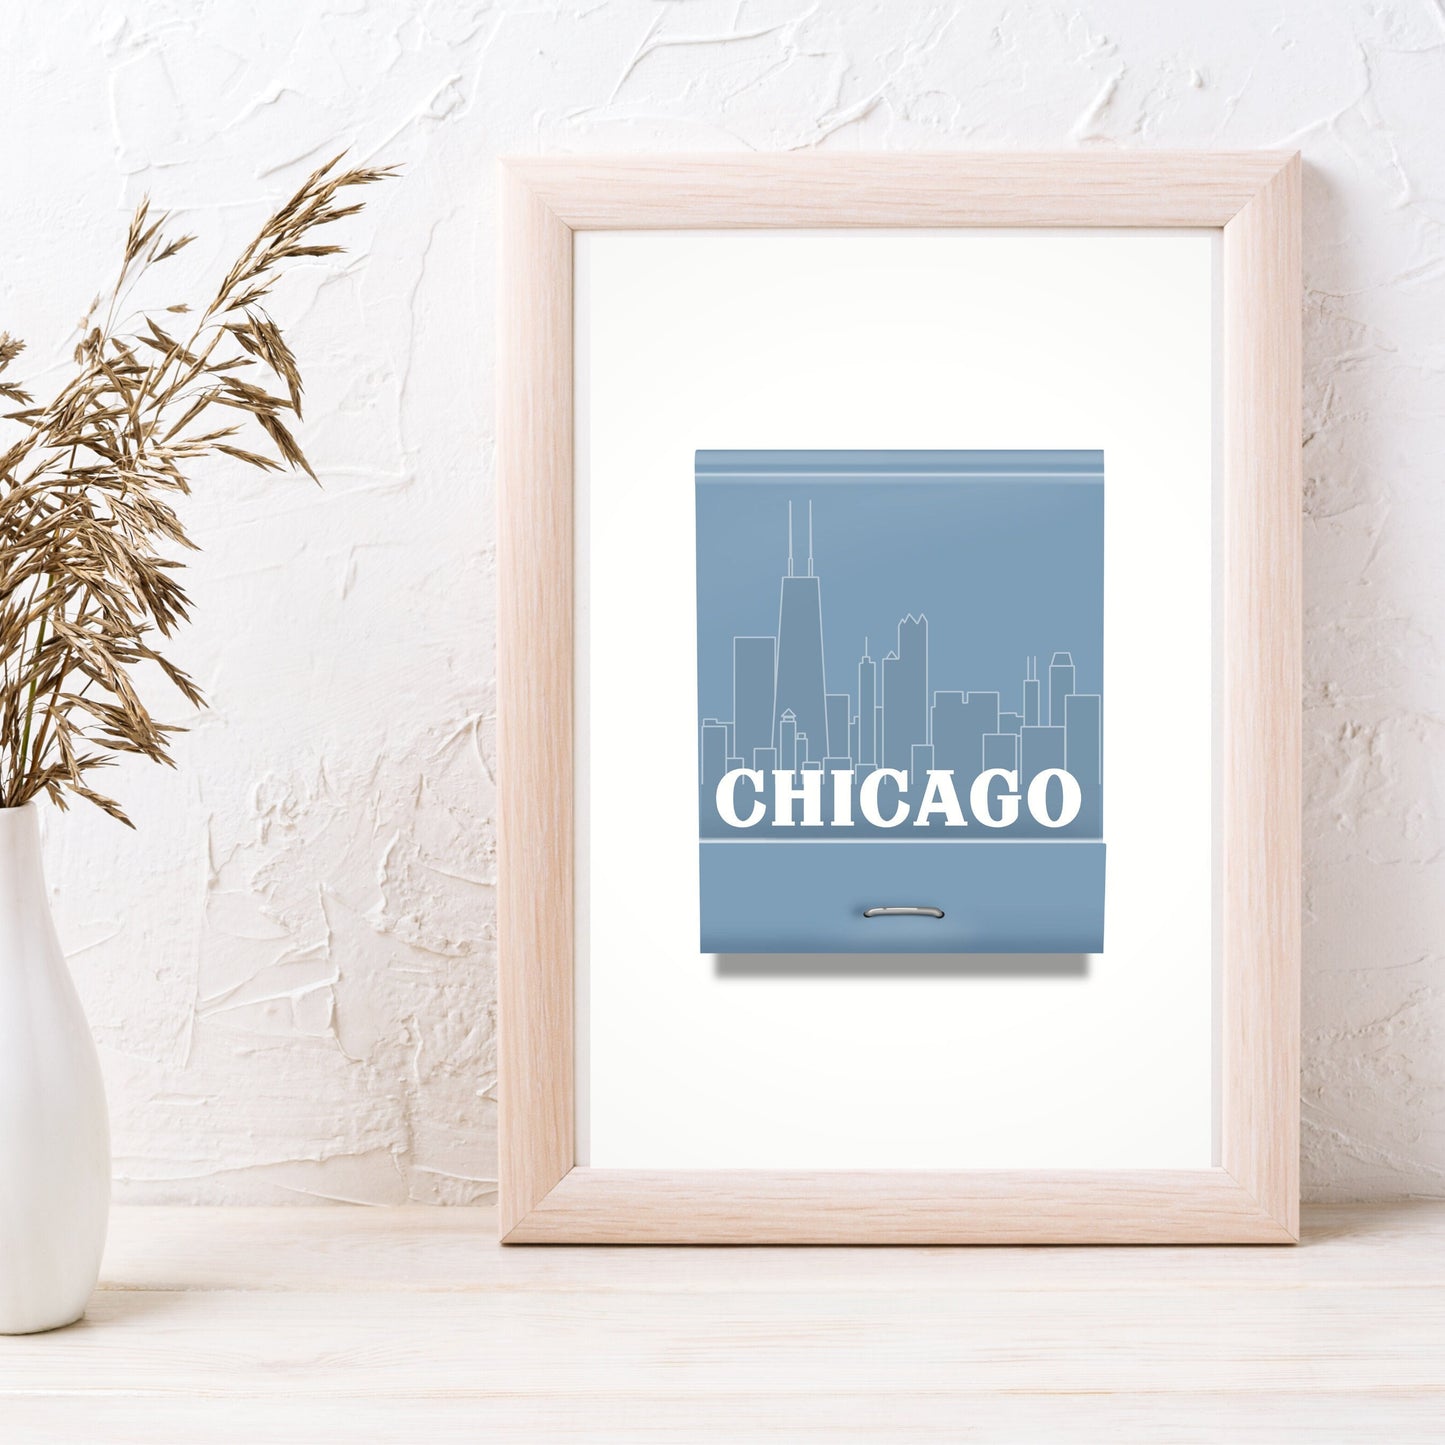 This wall art is a real conversation piece! It's completely hand drawn and features a blue matchbook with a line drawing of the Chicago skyline and the word Chicago over the cityscape. The perfect artwork for your Chicago house or apartment, or if you've moved away from Chicago it's a great reminder of that special city. It also makes a great Chicago souvenir or for a Chicago housewarming gift!